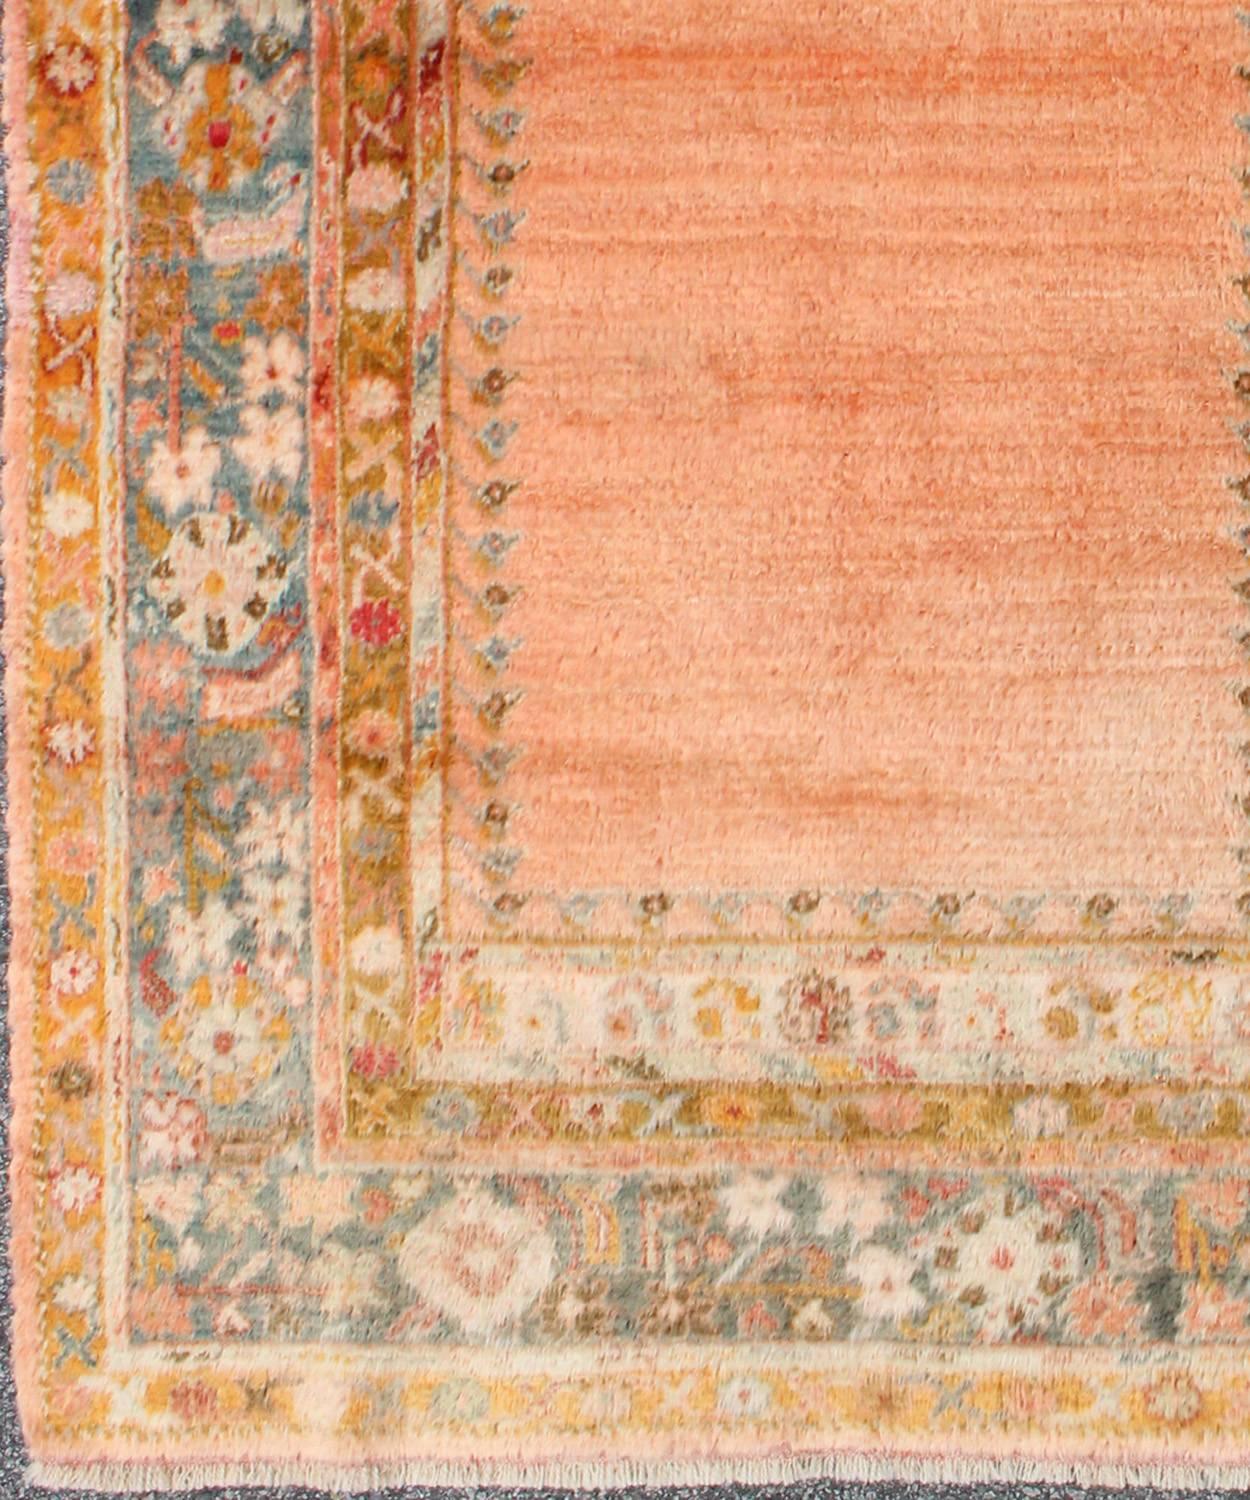 Antique Angora wool Oushak rug with solid salmon field and intricate borders, rug 17-0706, country of origin/type: Turkey/Oushak, circa 1900.

This antique Turkish rug (circa 1900) features a relatively intricate and detailed border area and an